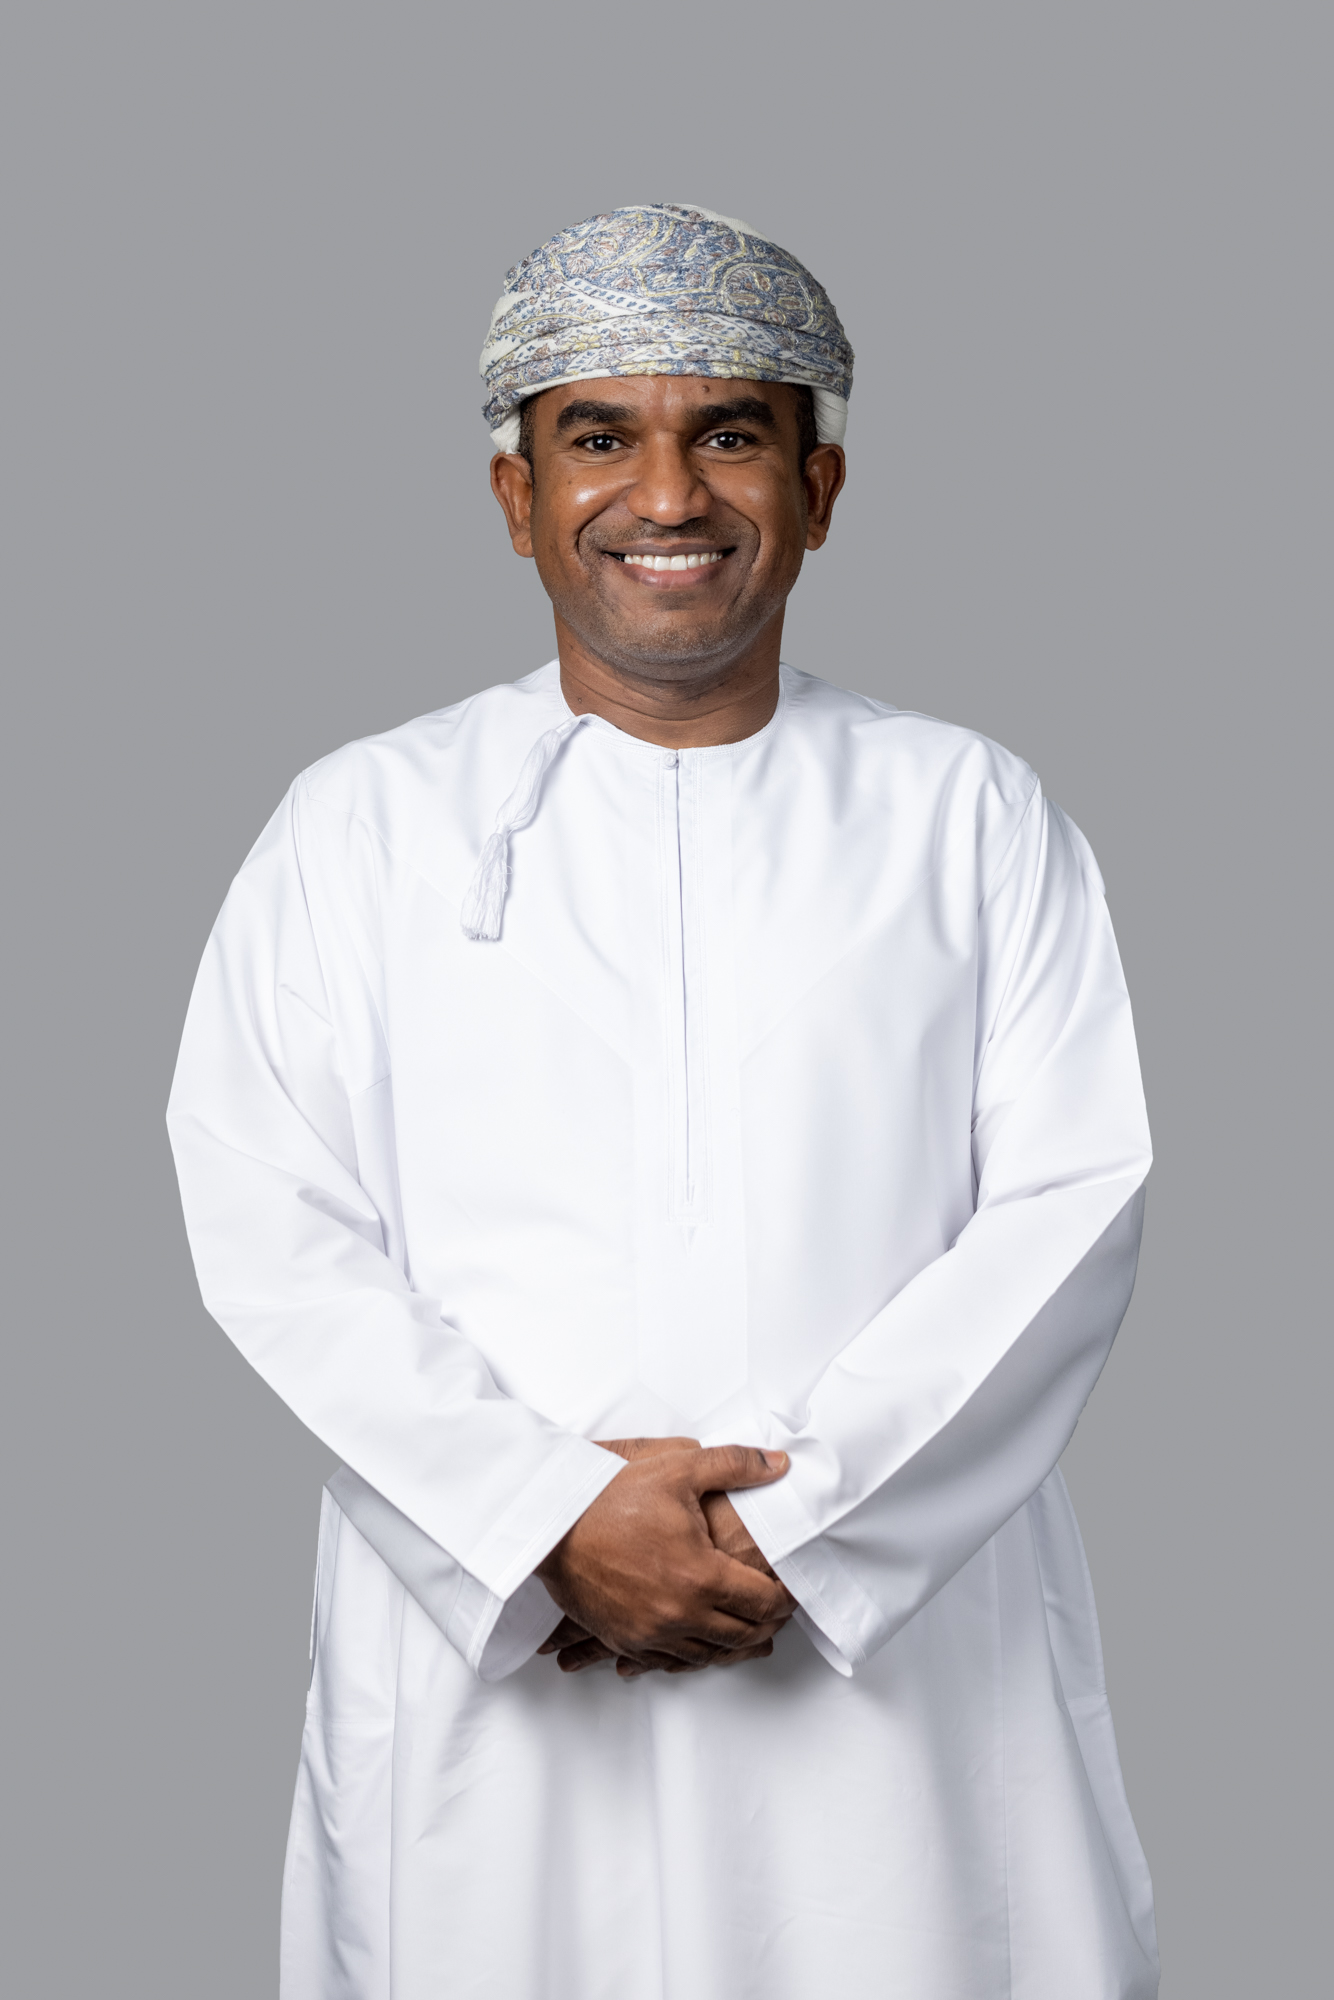 A new member of the Board of Directors of Muscat Gases Company image